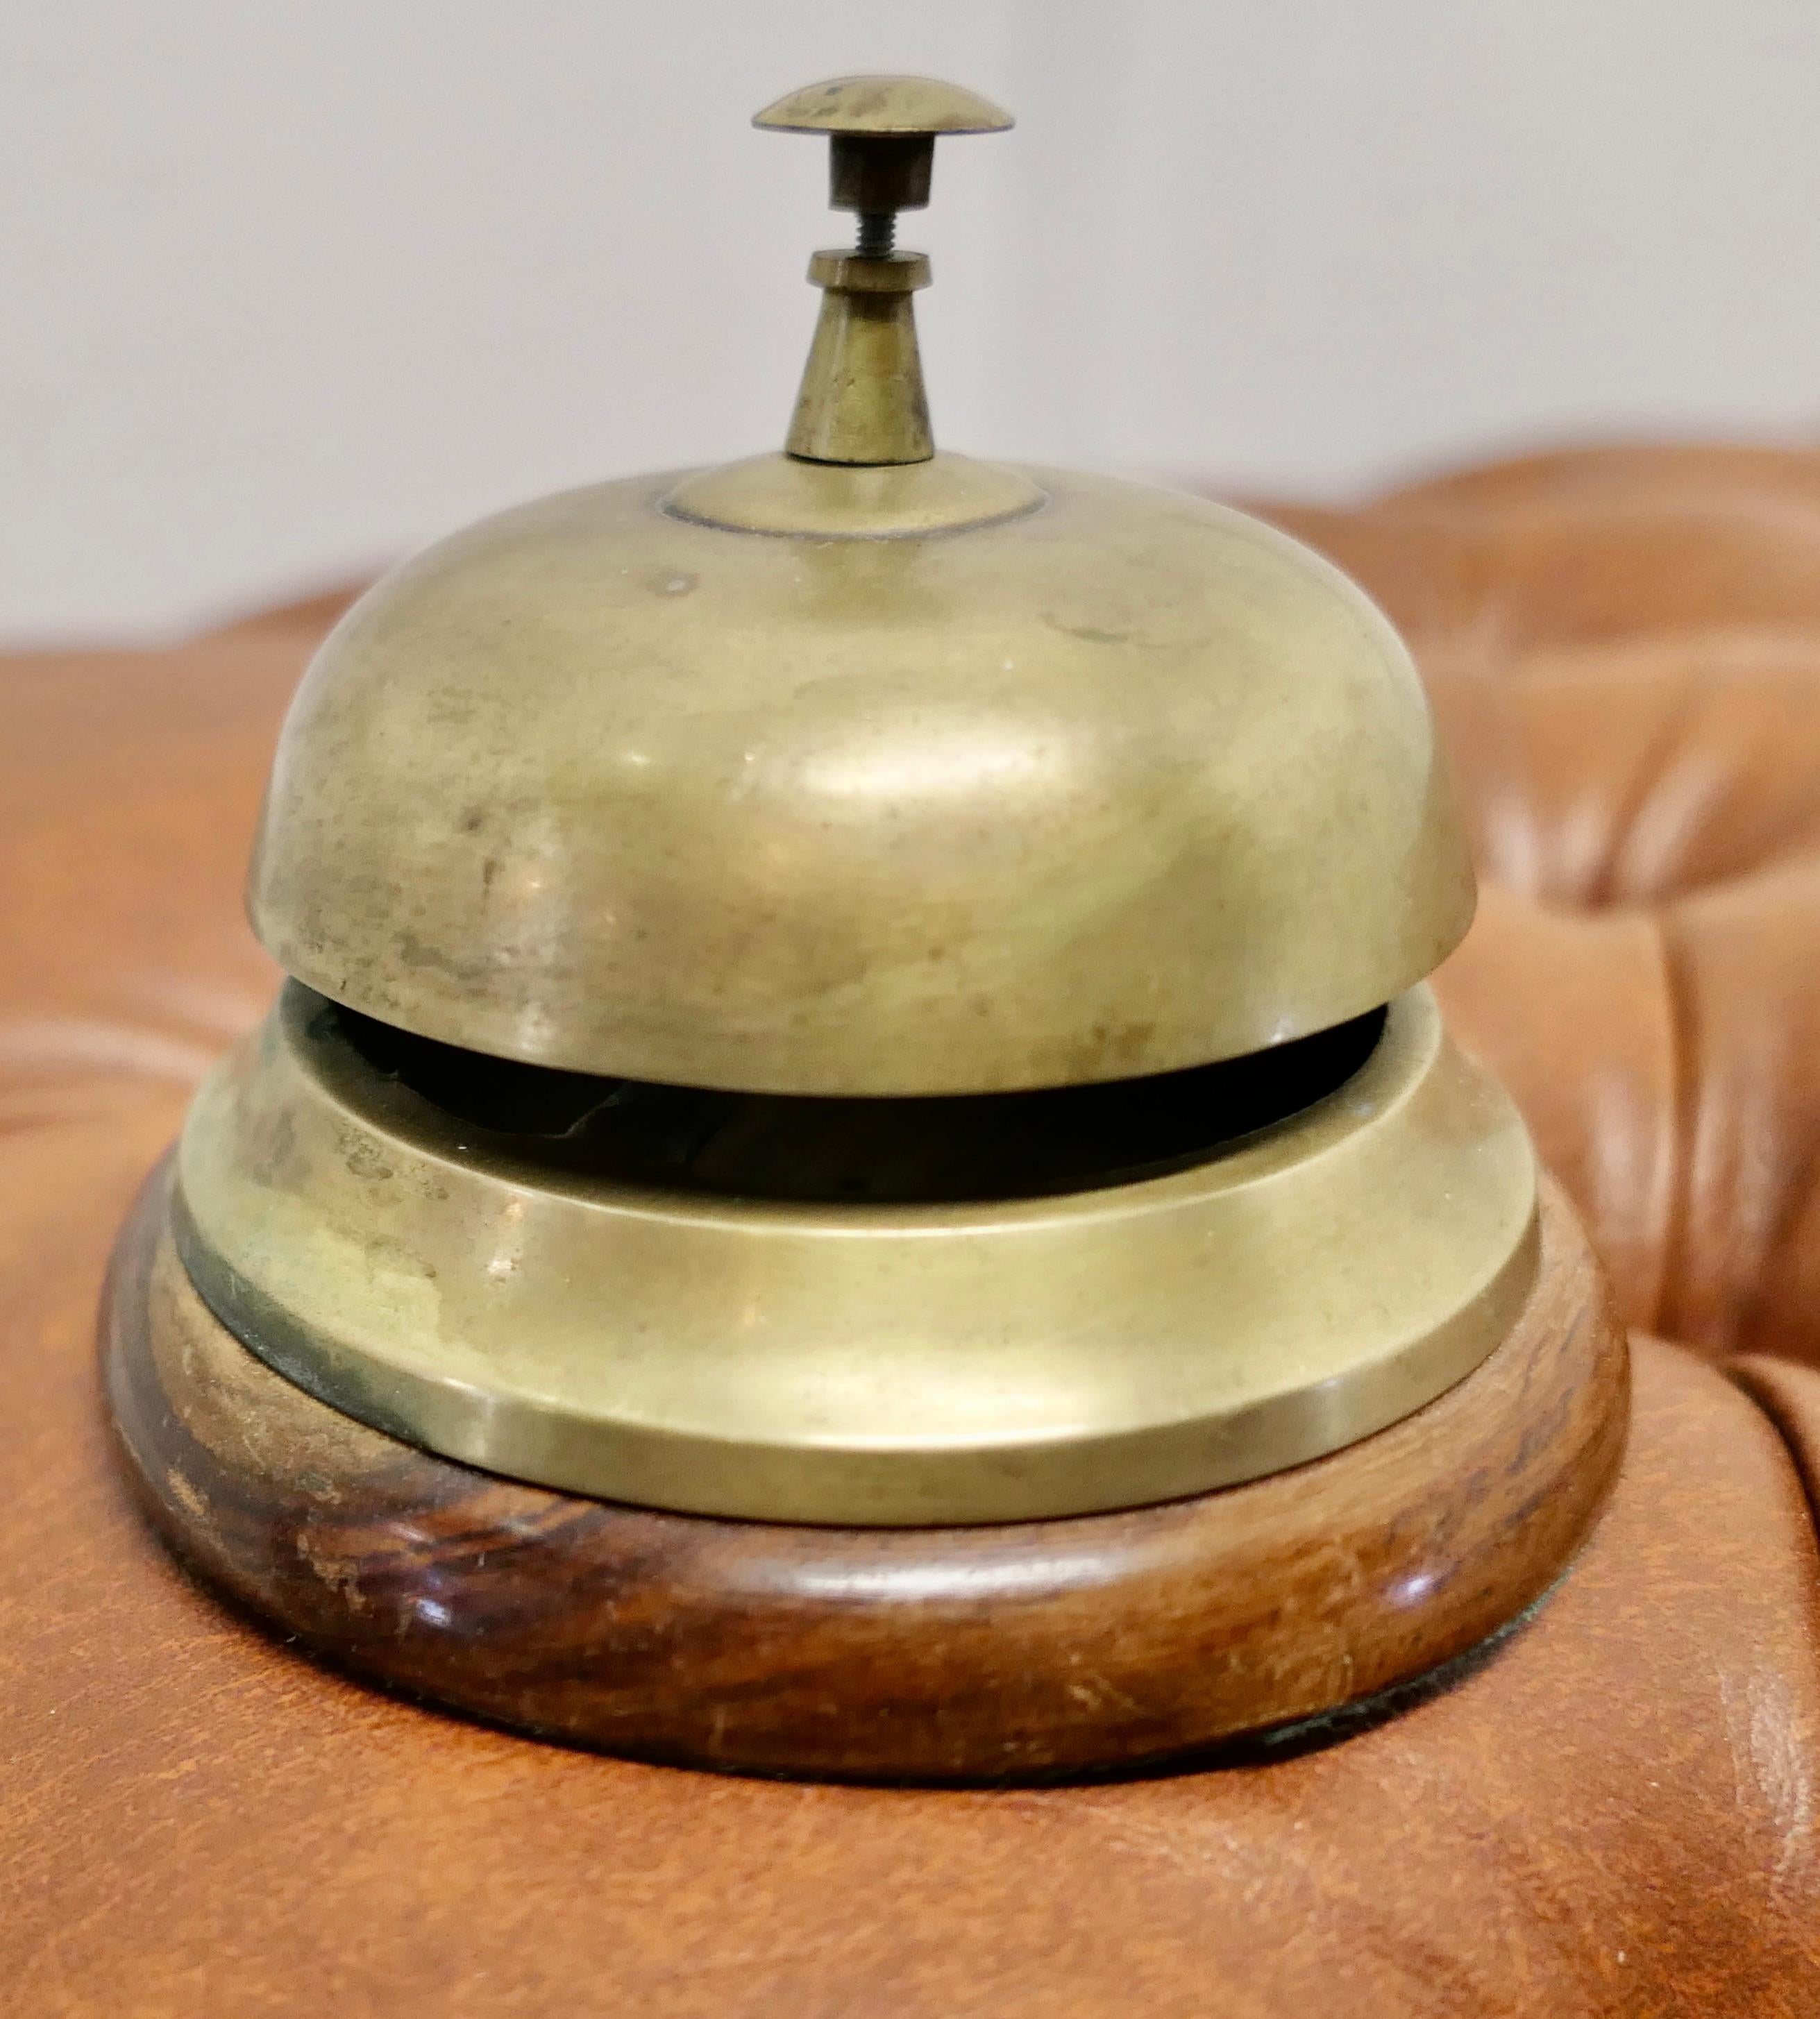 Victorian brass courtesy counter top bell, reception desk bell

Made in solid brass and set on a beautiful turned walnut base, the bell is in good ready to use condition with a demanding ding, the bell is 5” in diameter and 4.4” high 
JK56.